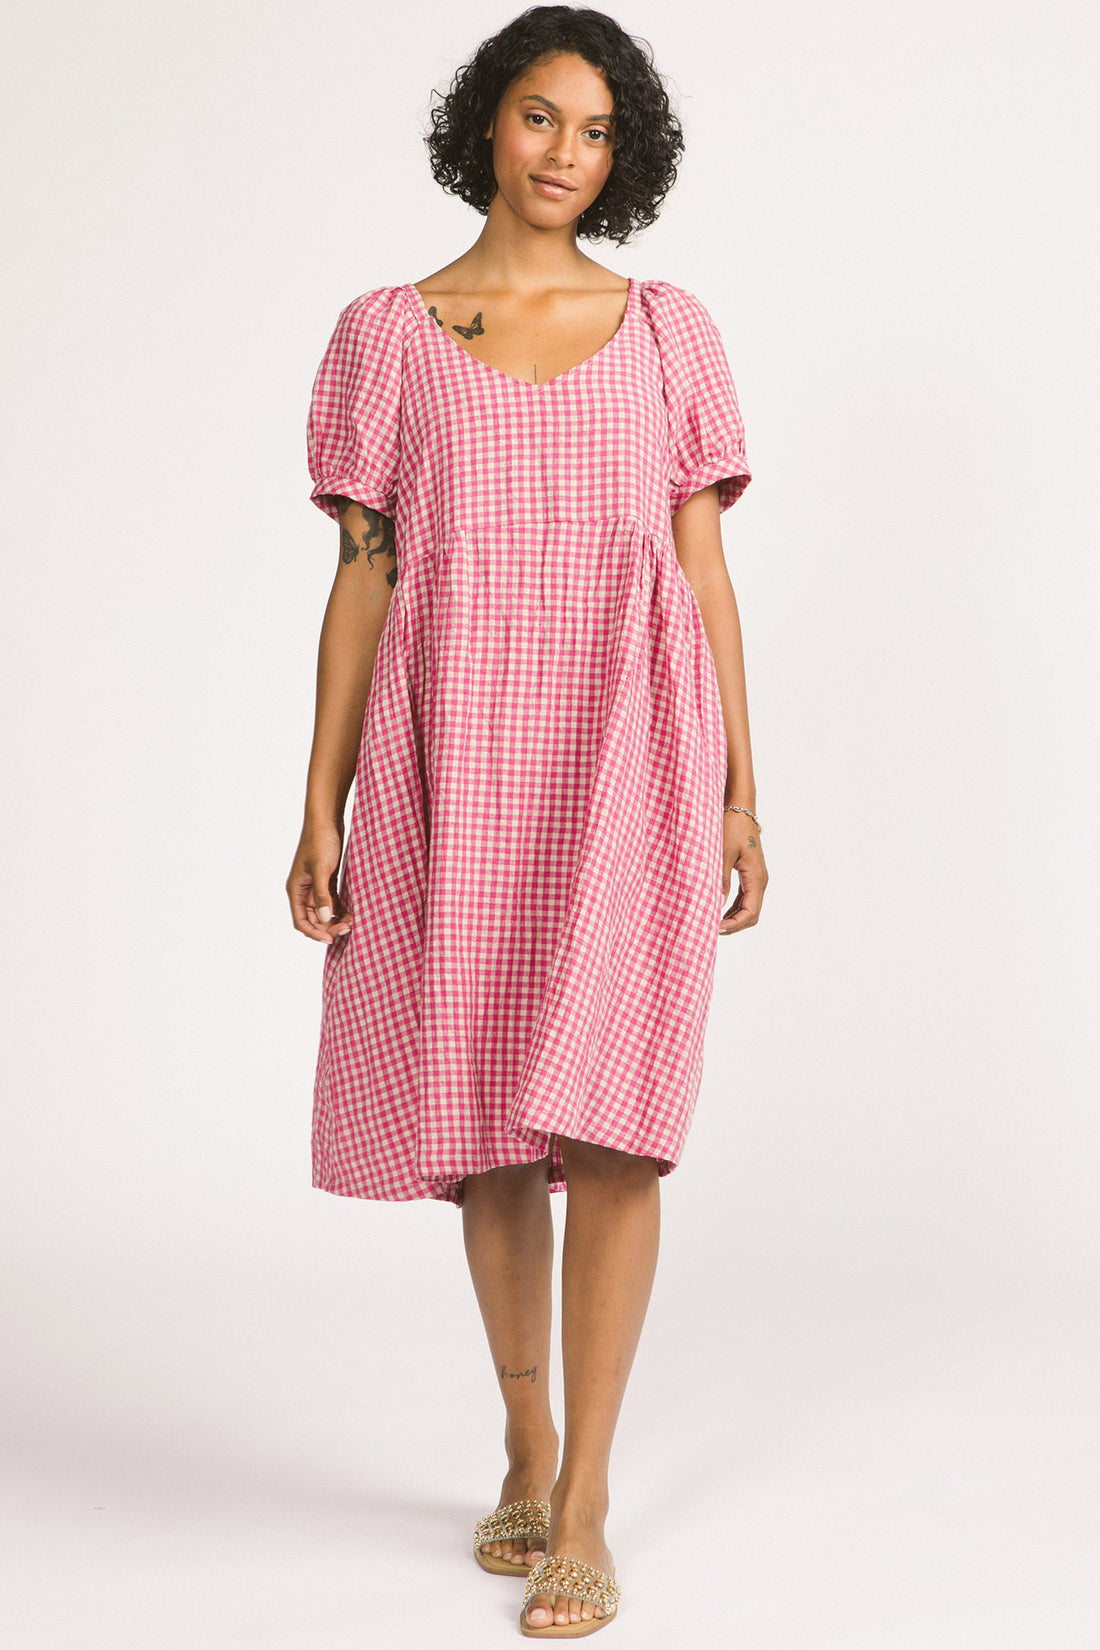 Verity Dress by Allison Wonderland, Pink Gingham, V-neck, slightly puffed short sleeves with gathers at cuffs, gathers at front back and sides, below the knee length, pockets, 100% linen, sizes 2-12, made in Vancouver